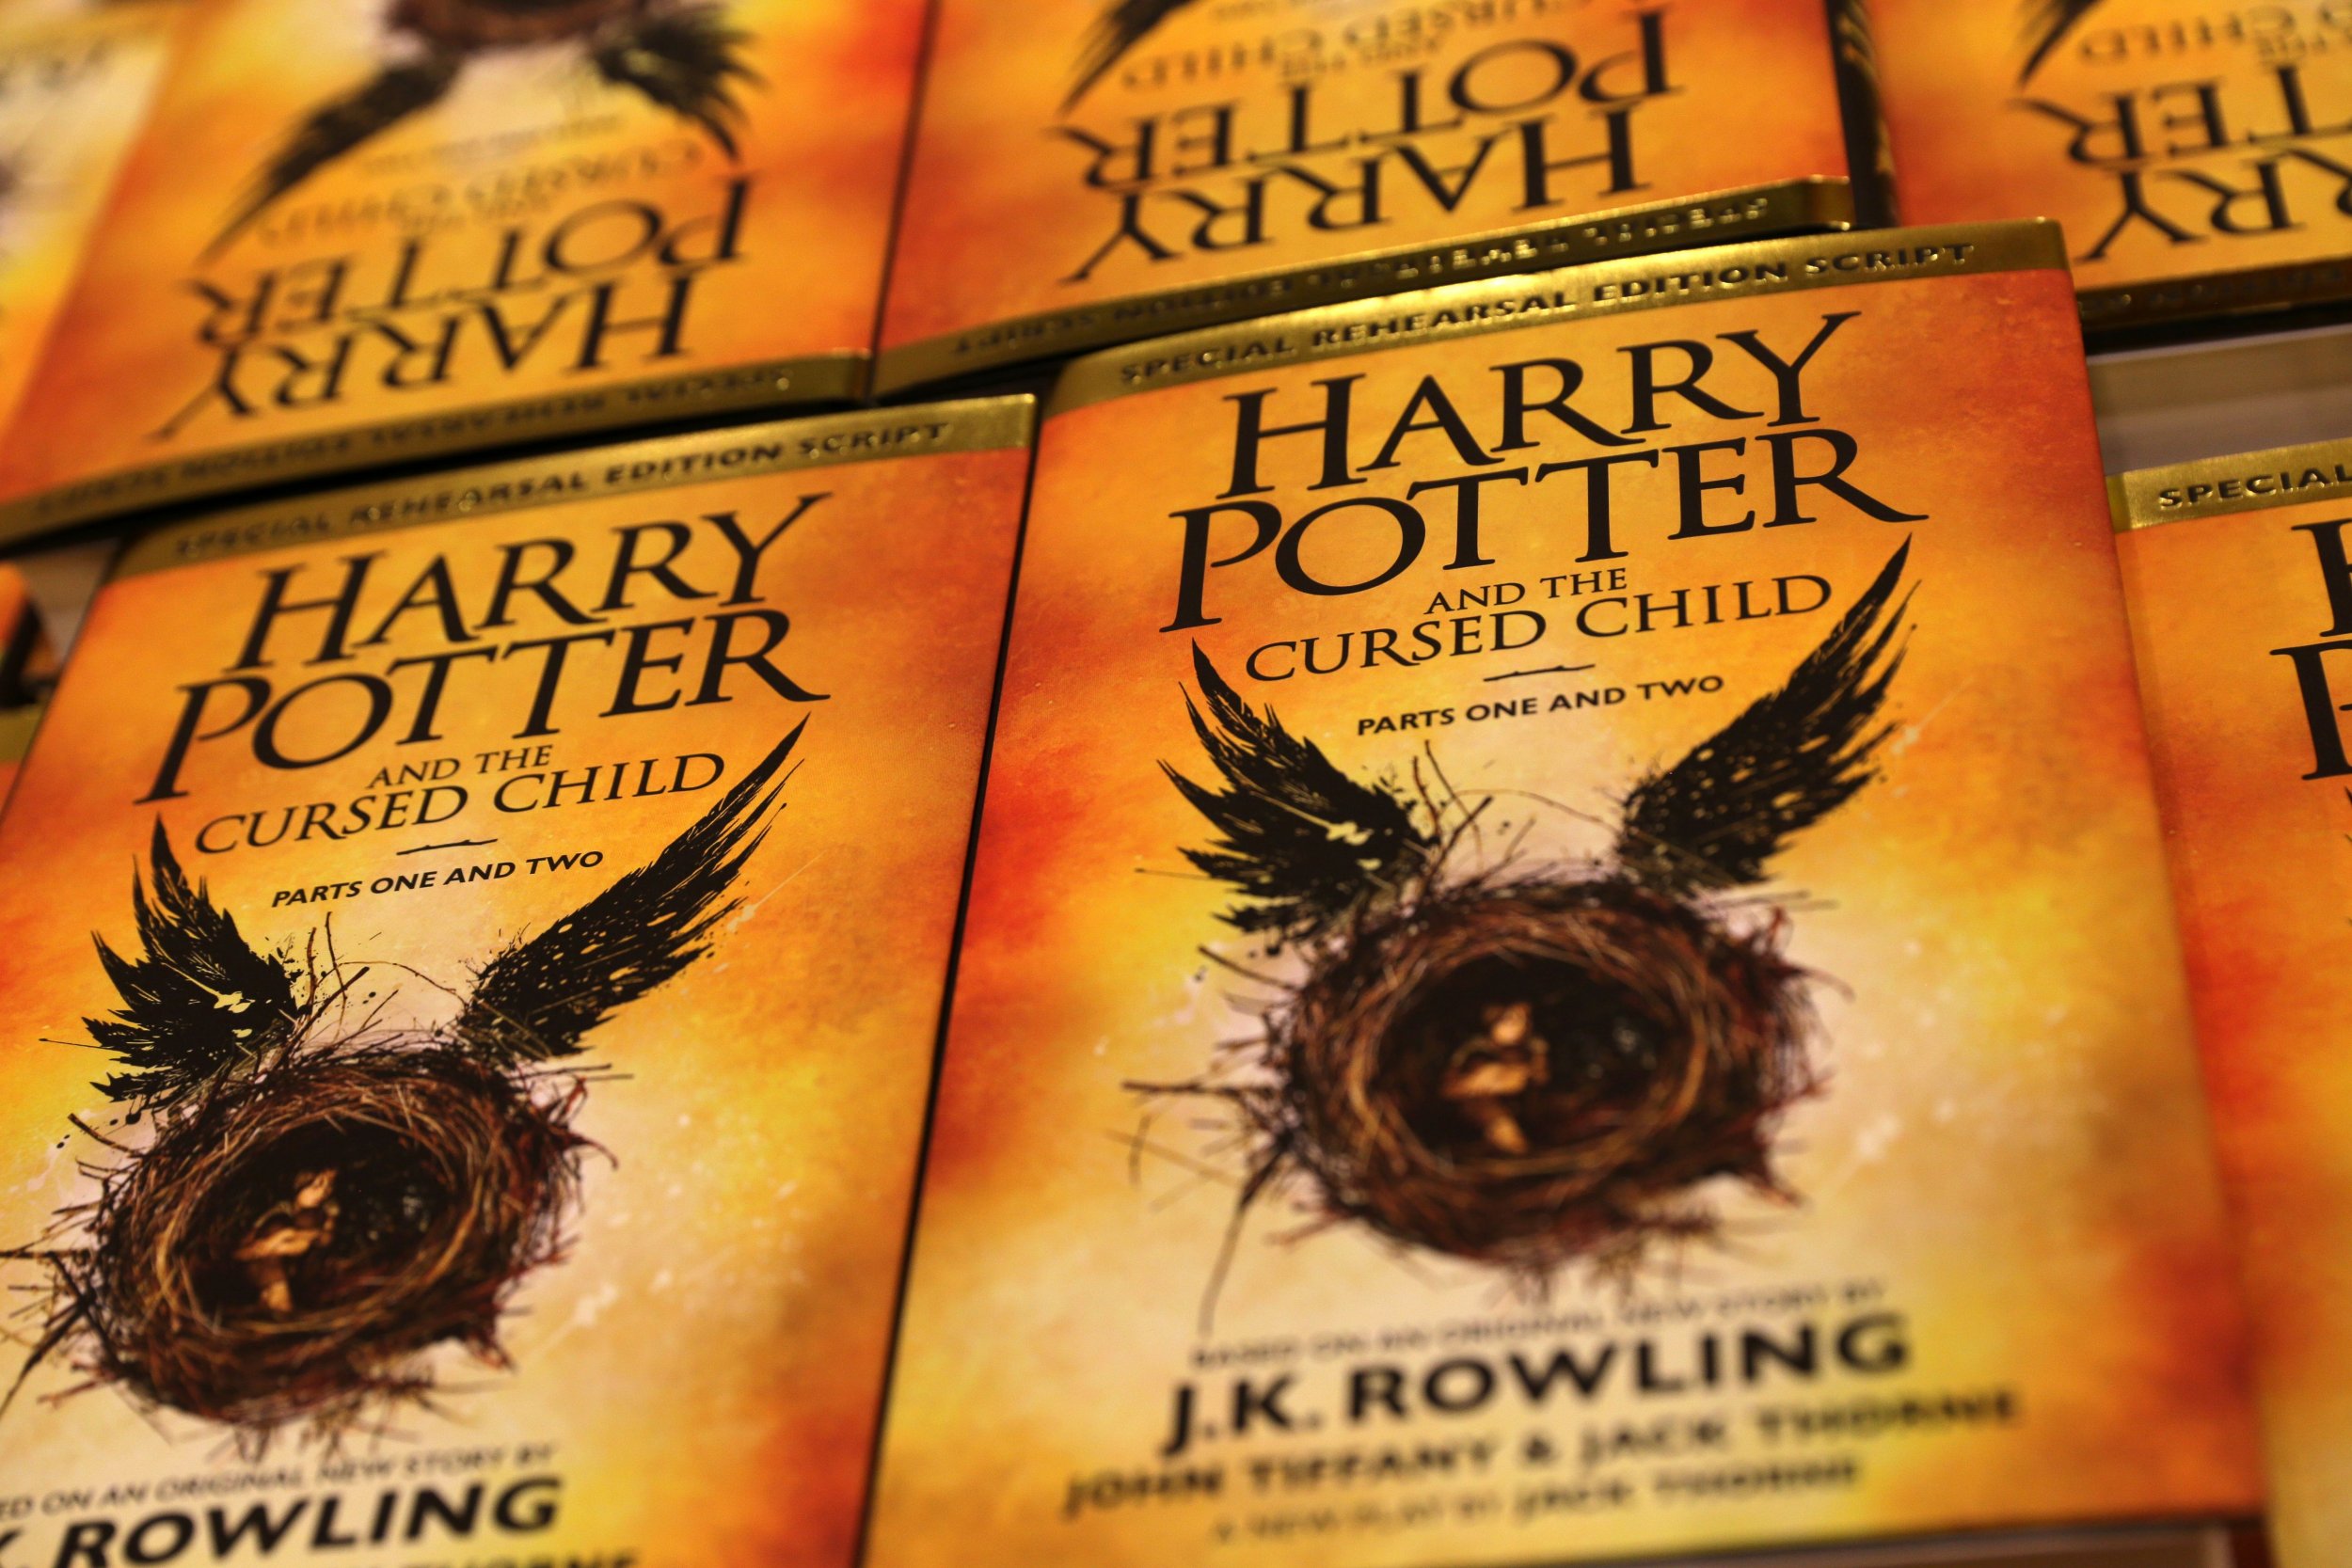 Harry Potter and the Cursed Child book